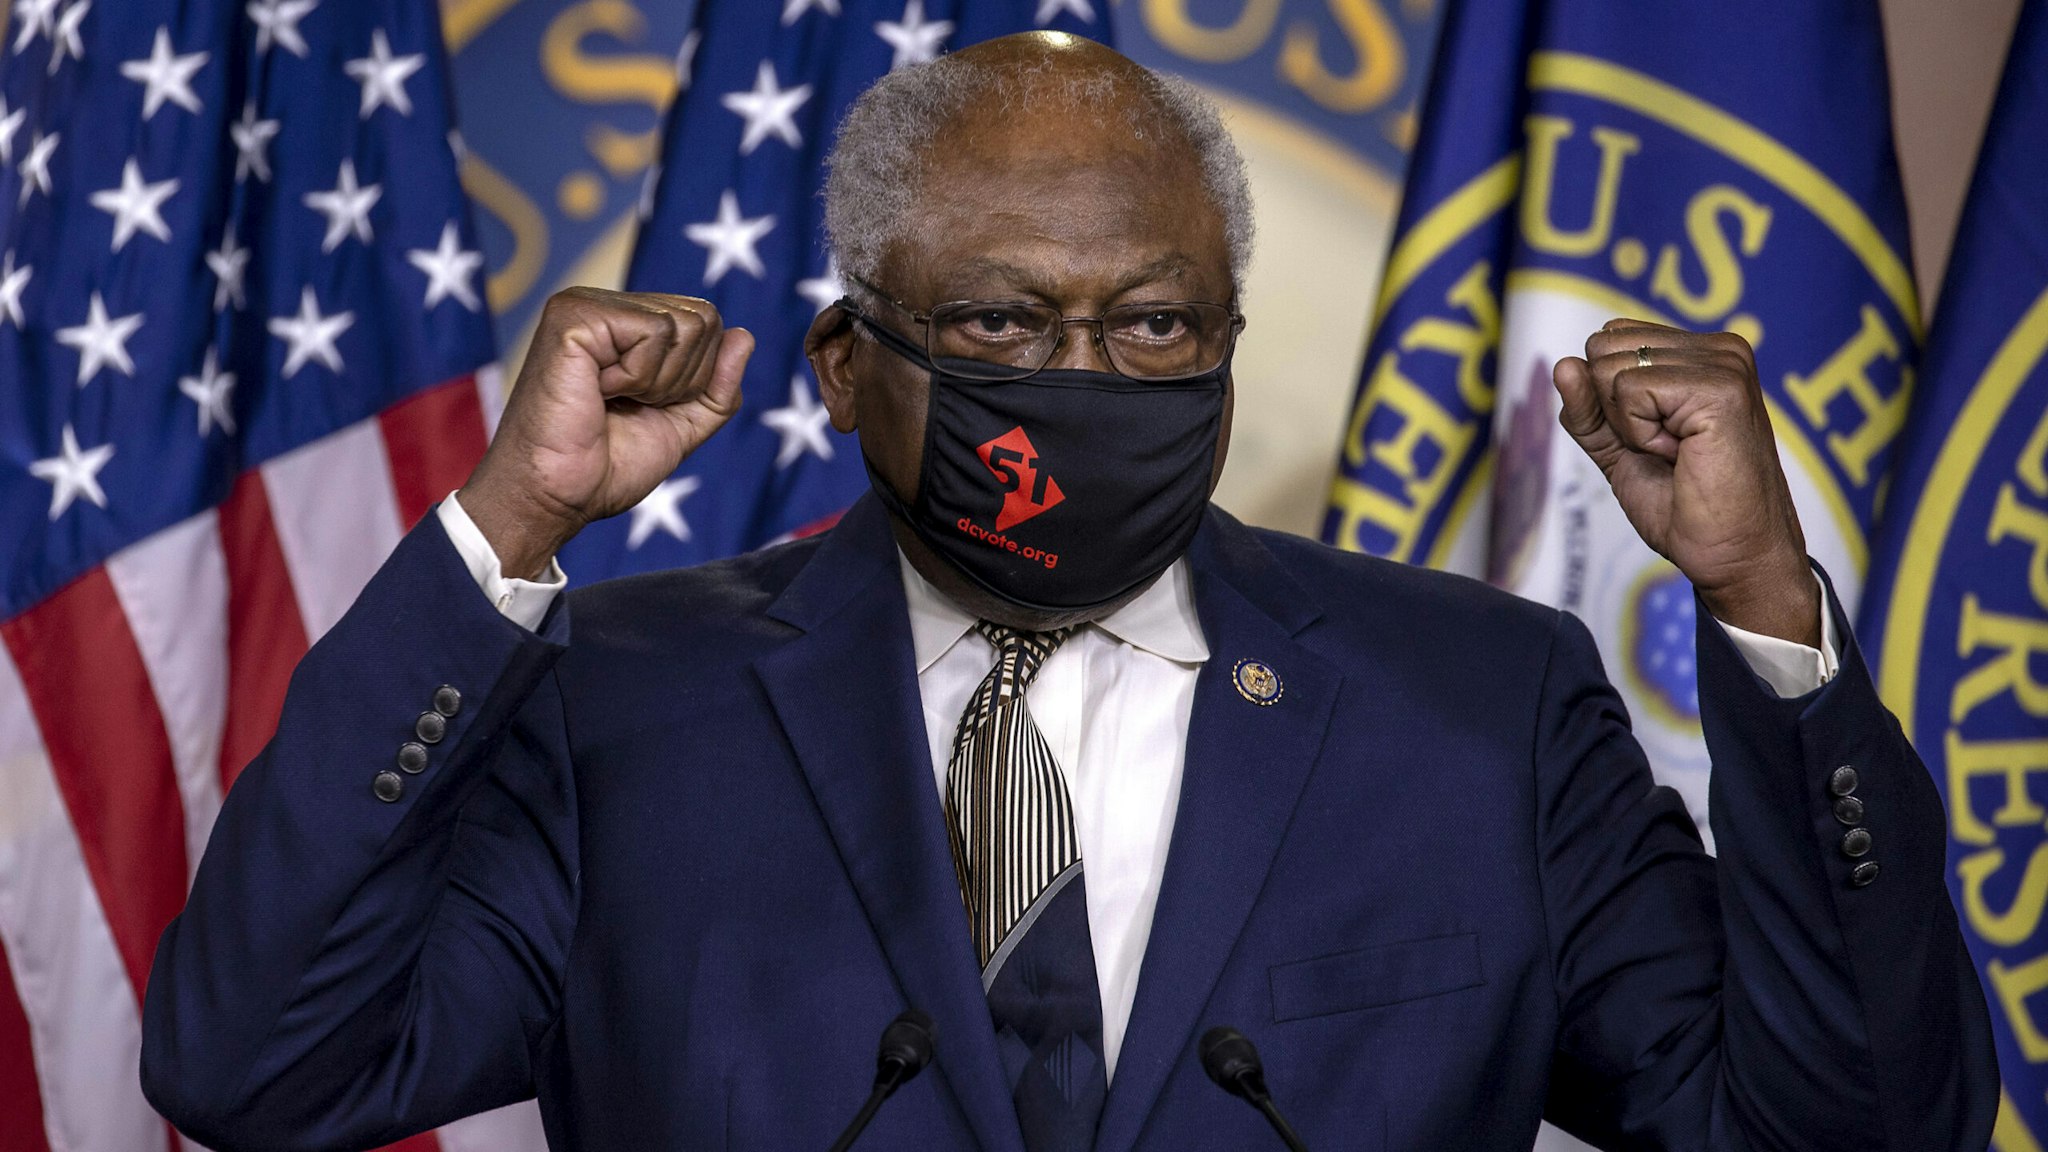 WASHINGTON, DC - JUNE 26: House Majority Whip James Clyburn (D-SC) speaks at a press conference on Capitol Hill as House Democrats mark the anniversary of Shelby County v. Holder on June 26, 2020 in Washington, DC. In its 2013 Shelby decision, the Supreme Court ruled the formula determining which states were covered by the pre-clearance provision in the Voting Rights Act was outdated, sending a mandate to Congress to update the formula.